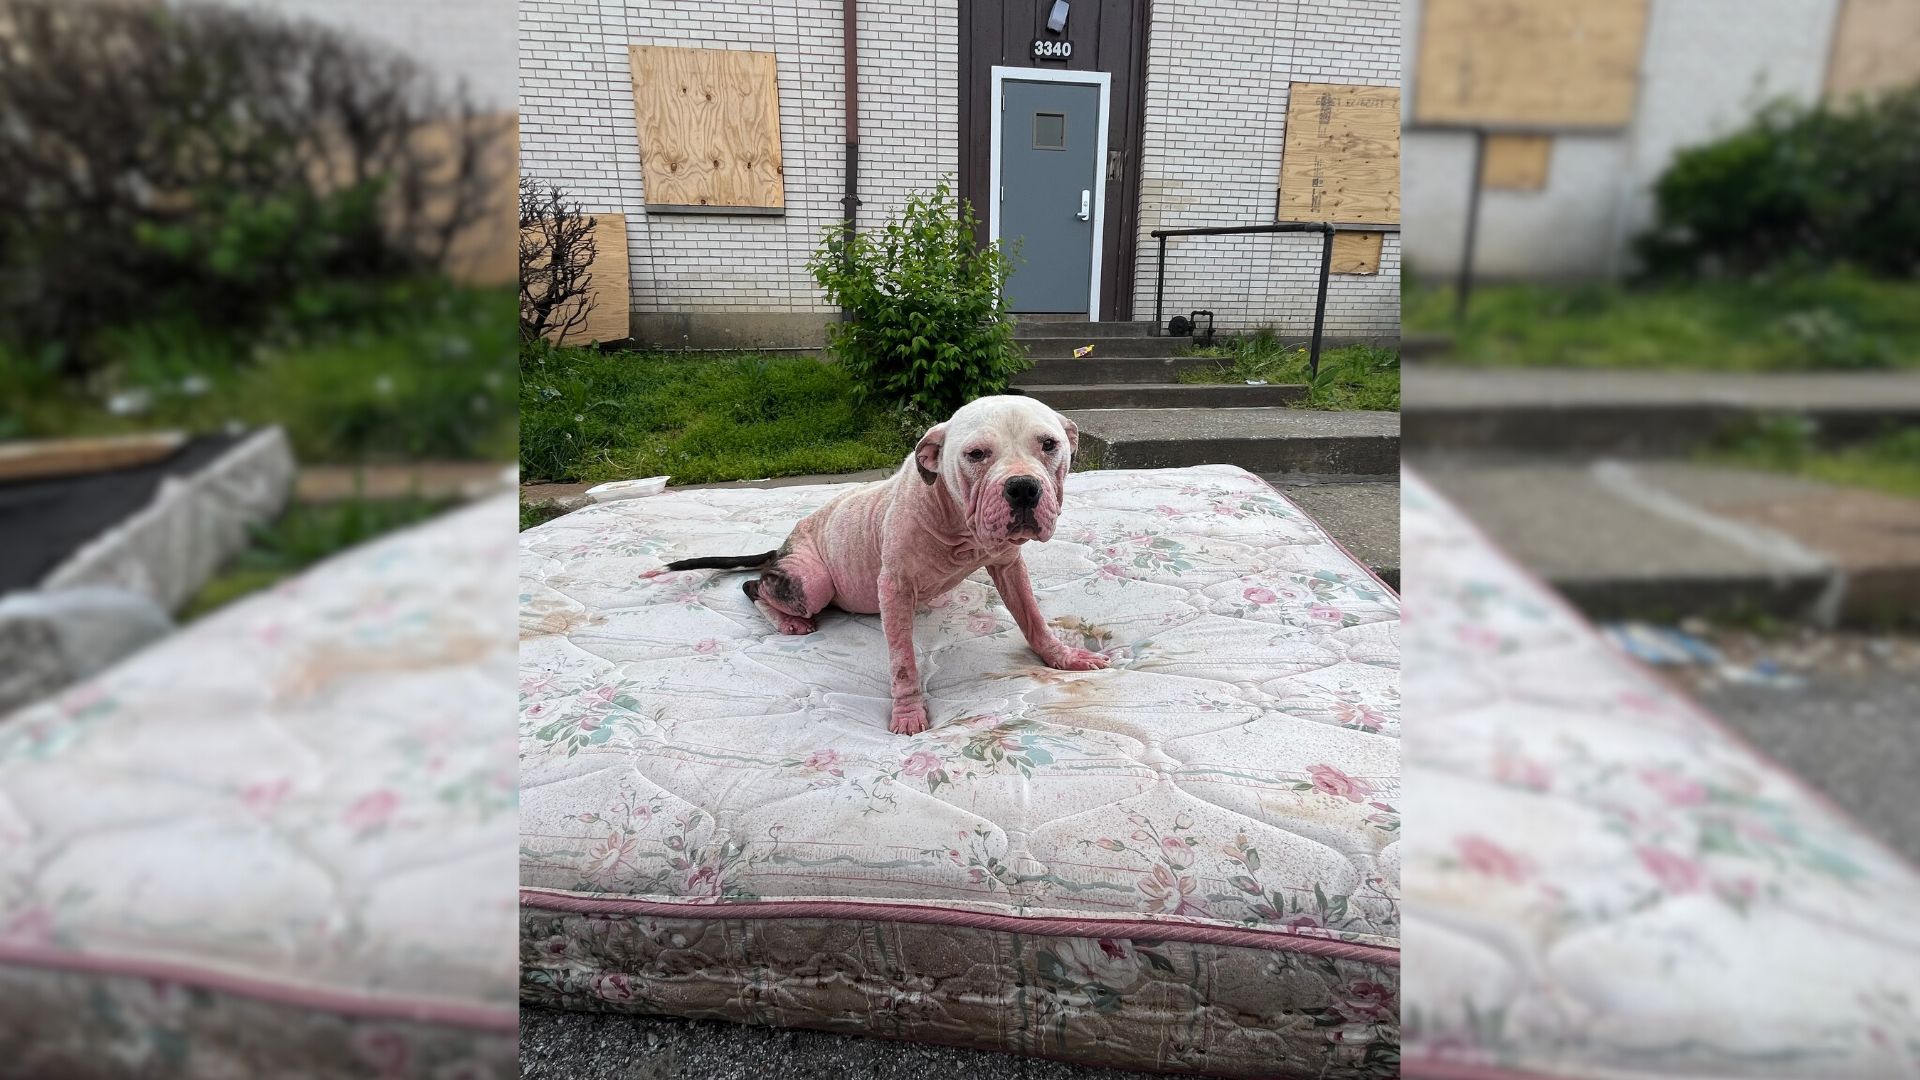 Rescuers Were Surprised To Find A Stray Dog Lying On A Mattress Near An Abandoned Building